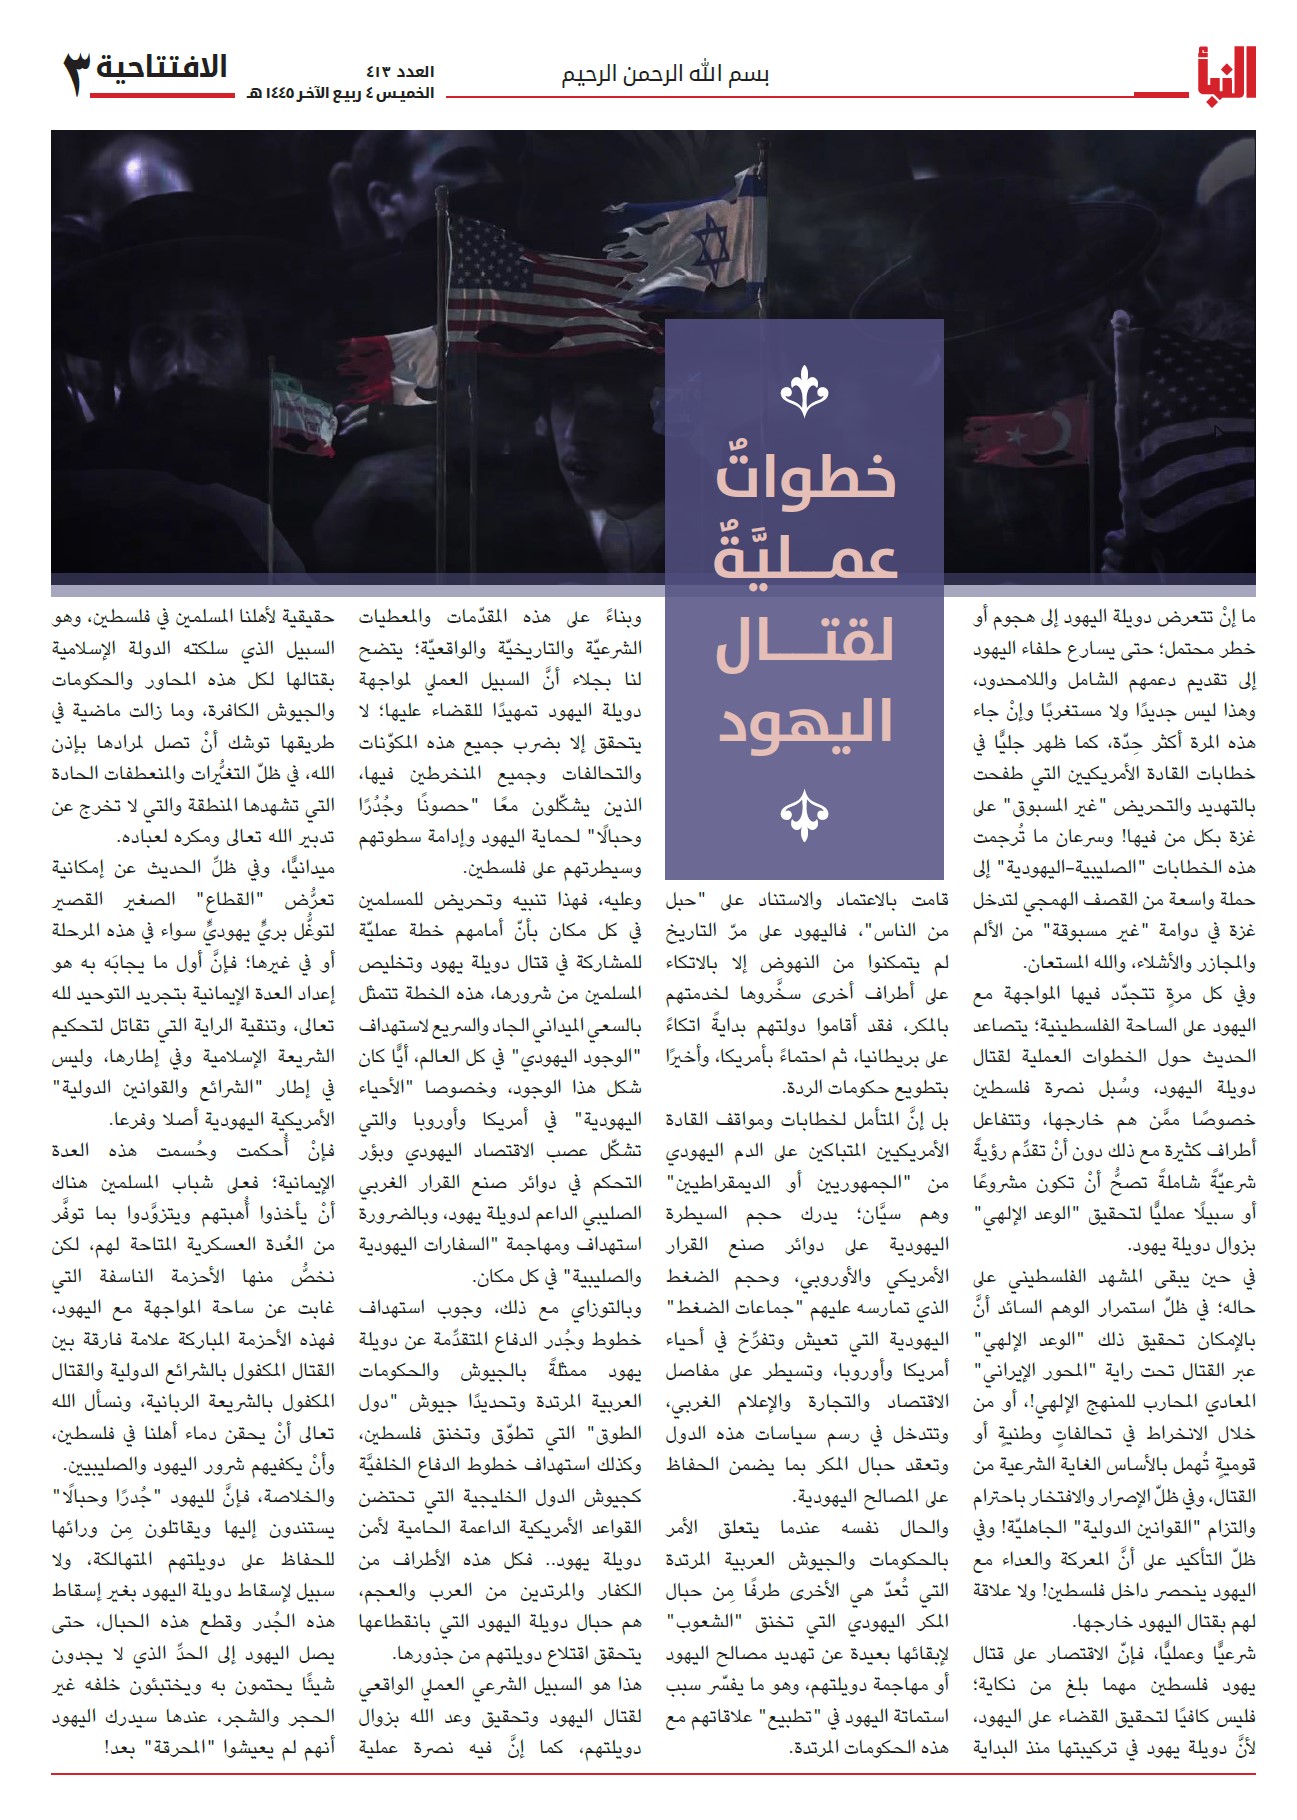 (PDF) Islamic State Releases Newspaper “al-Naba” #413 Released on 19 October 2023 (Attacks on PKK, Shia Worshippers, Christians, Nigerien, Nigerian, Congolese and Filipino Forces)